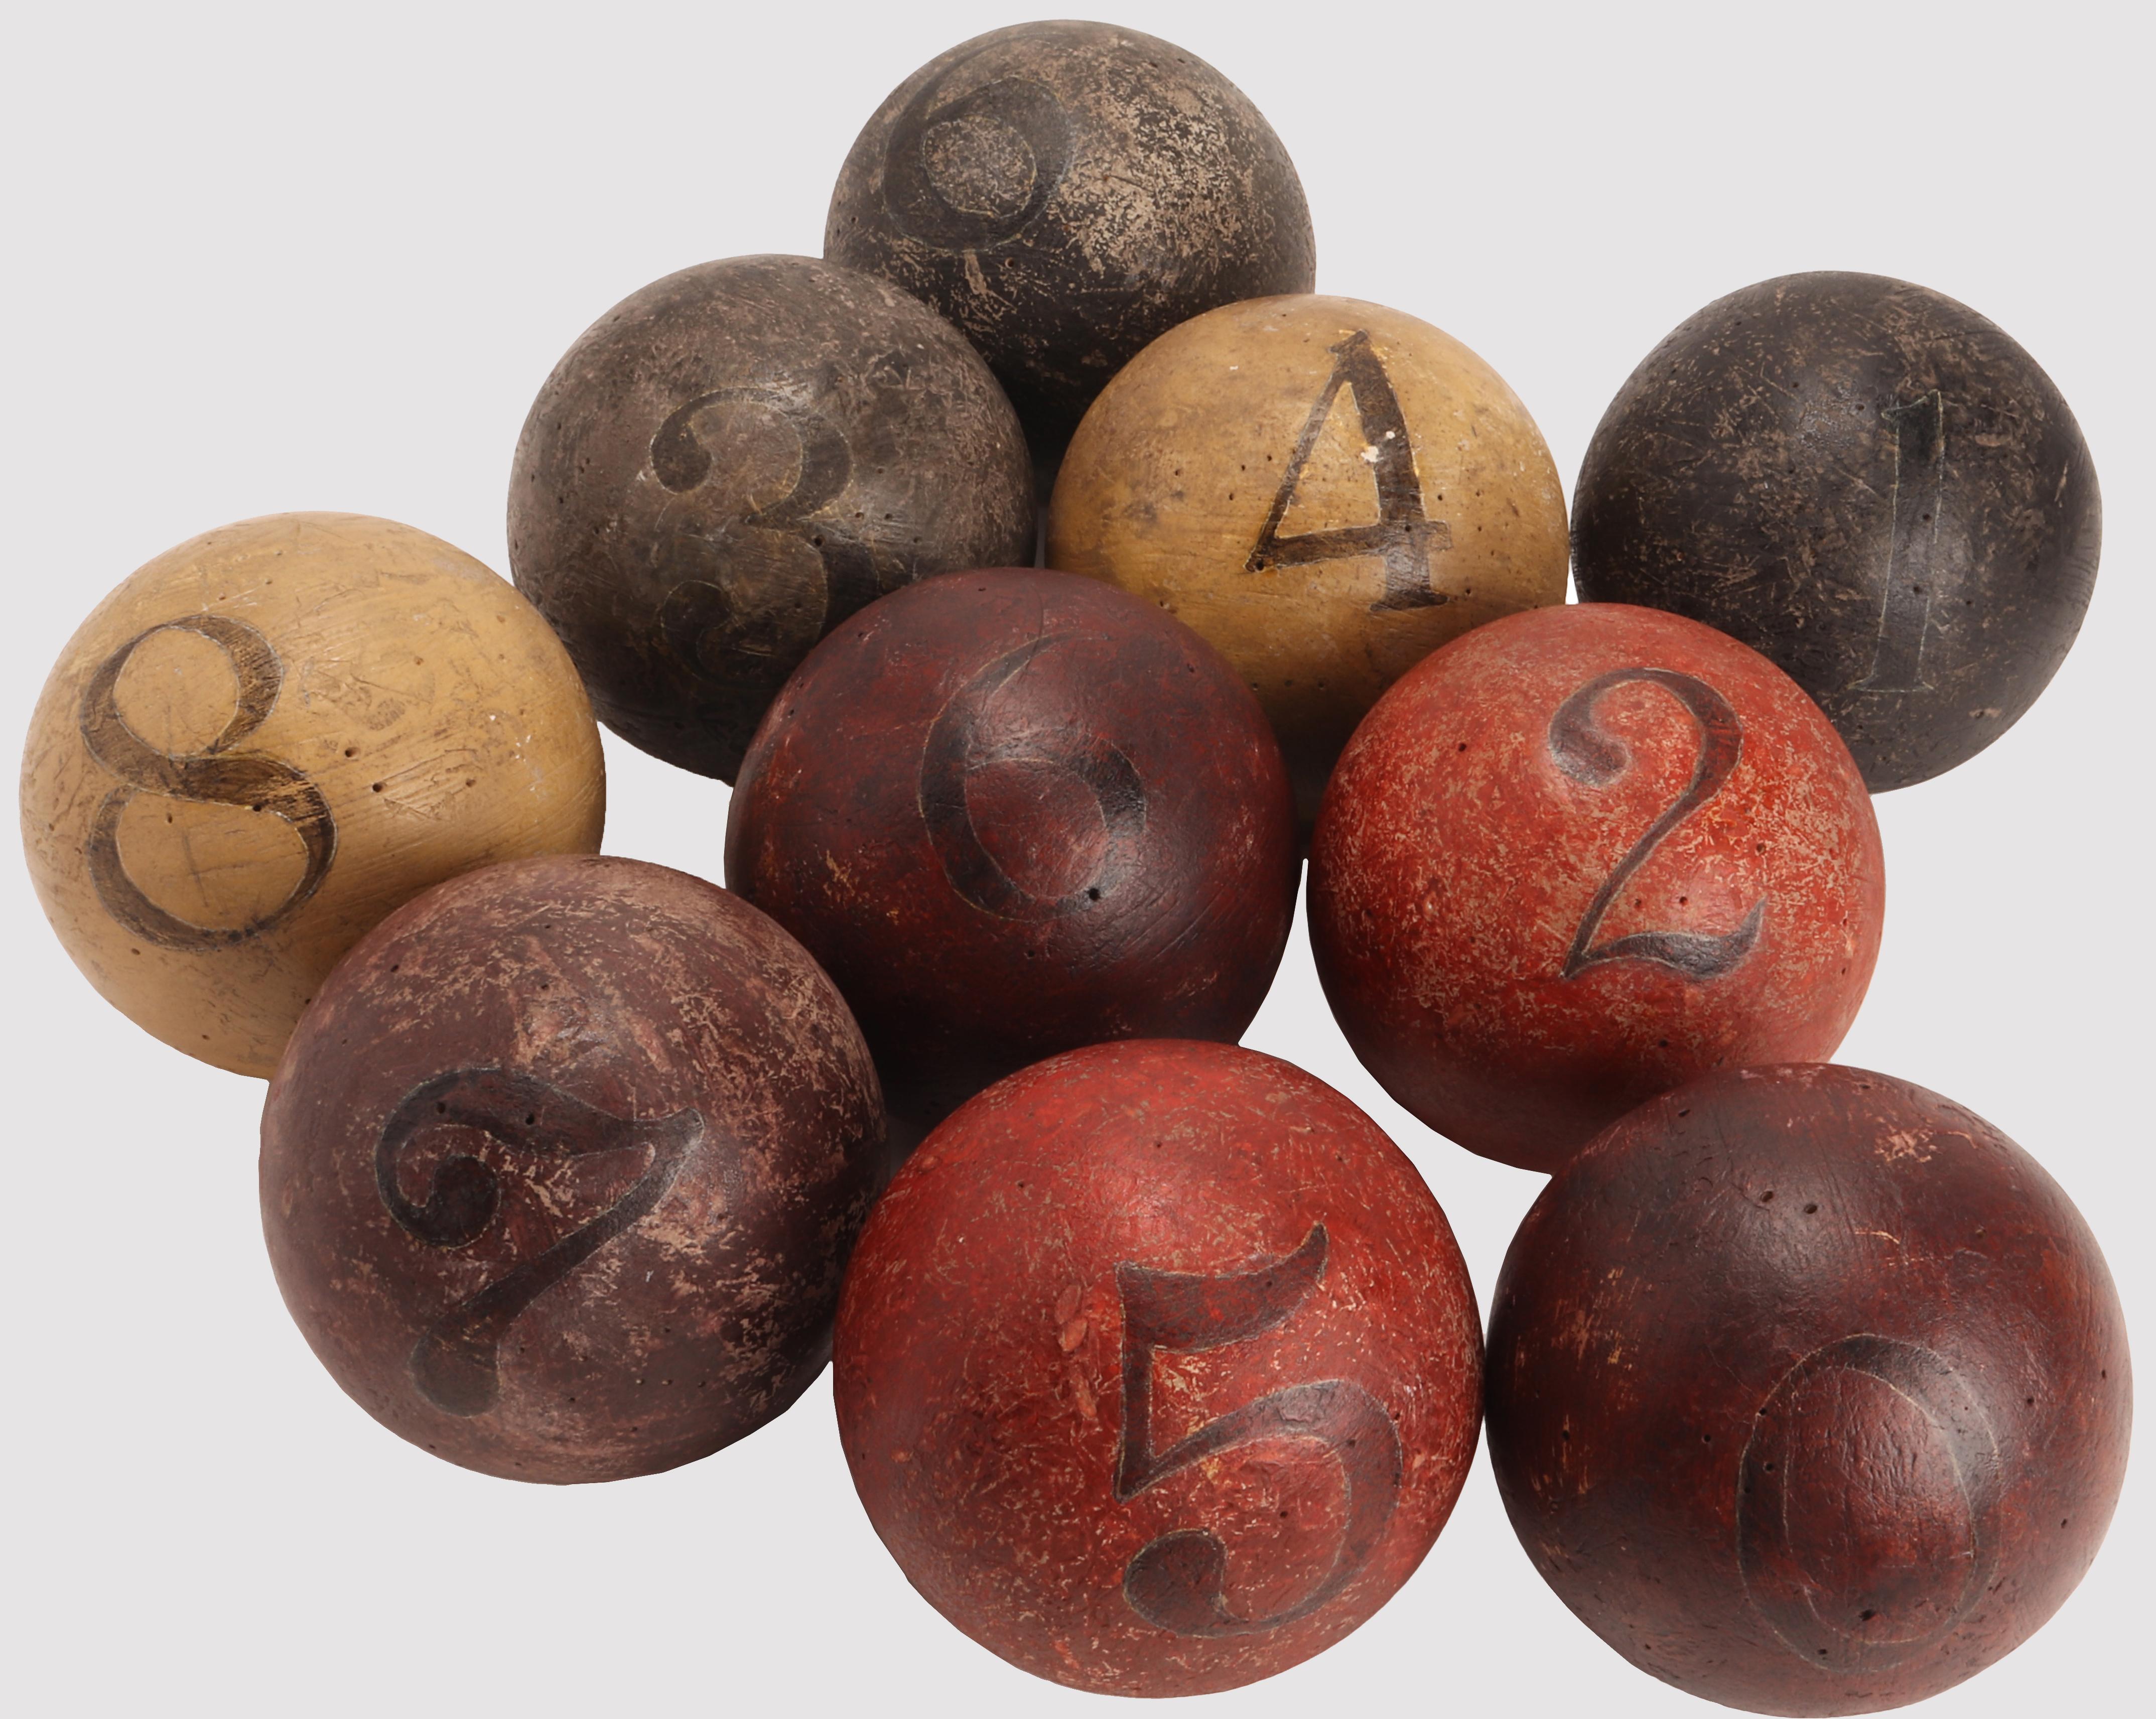 The ball weight riddle. There are 10 painted wood balls available, same circumference, all of them, numbered from 0 to 9, 9 of which have the same weight and only one weight more than the others. The heaviest one must be identified by having only